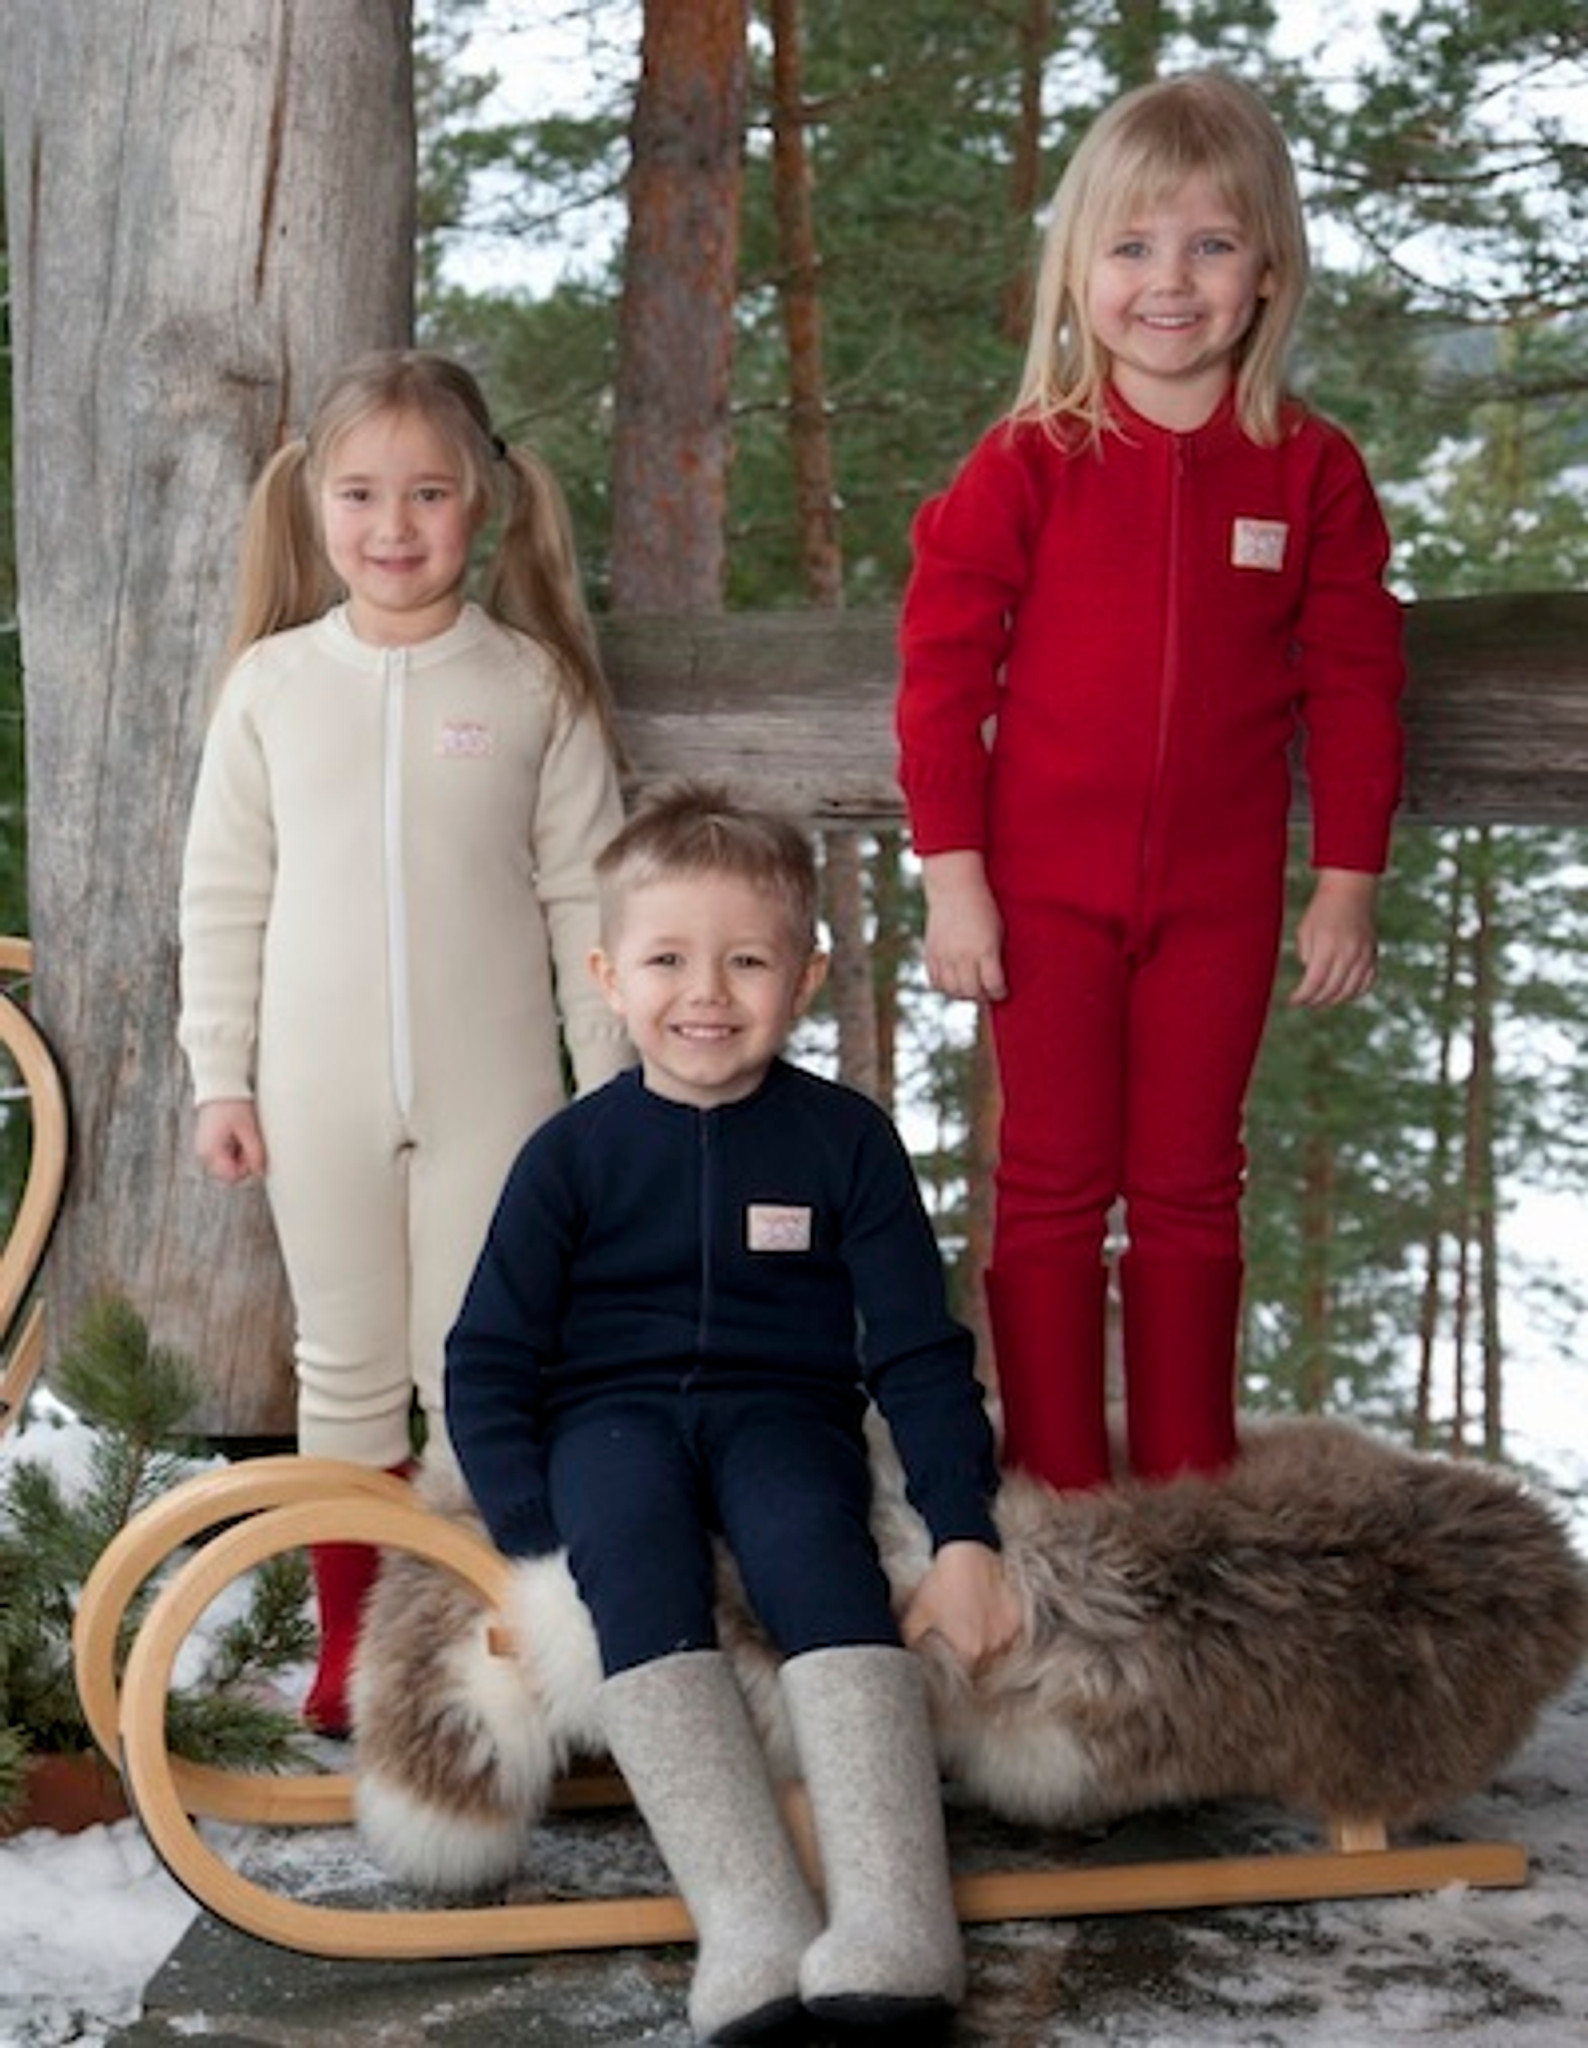 Merino Wool One-Pieces for Boys Sizes 2T-5T